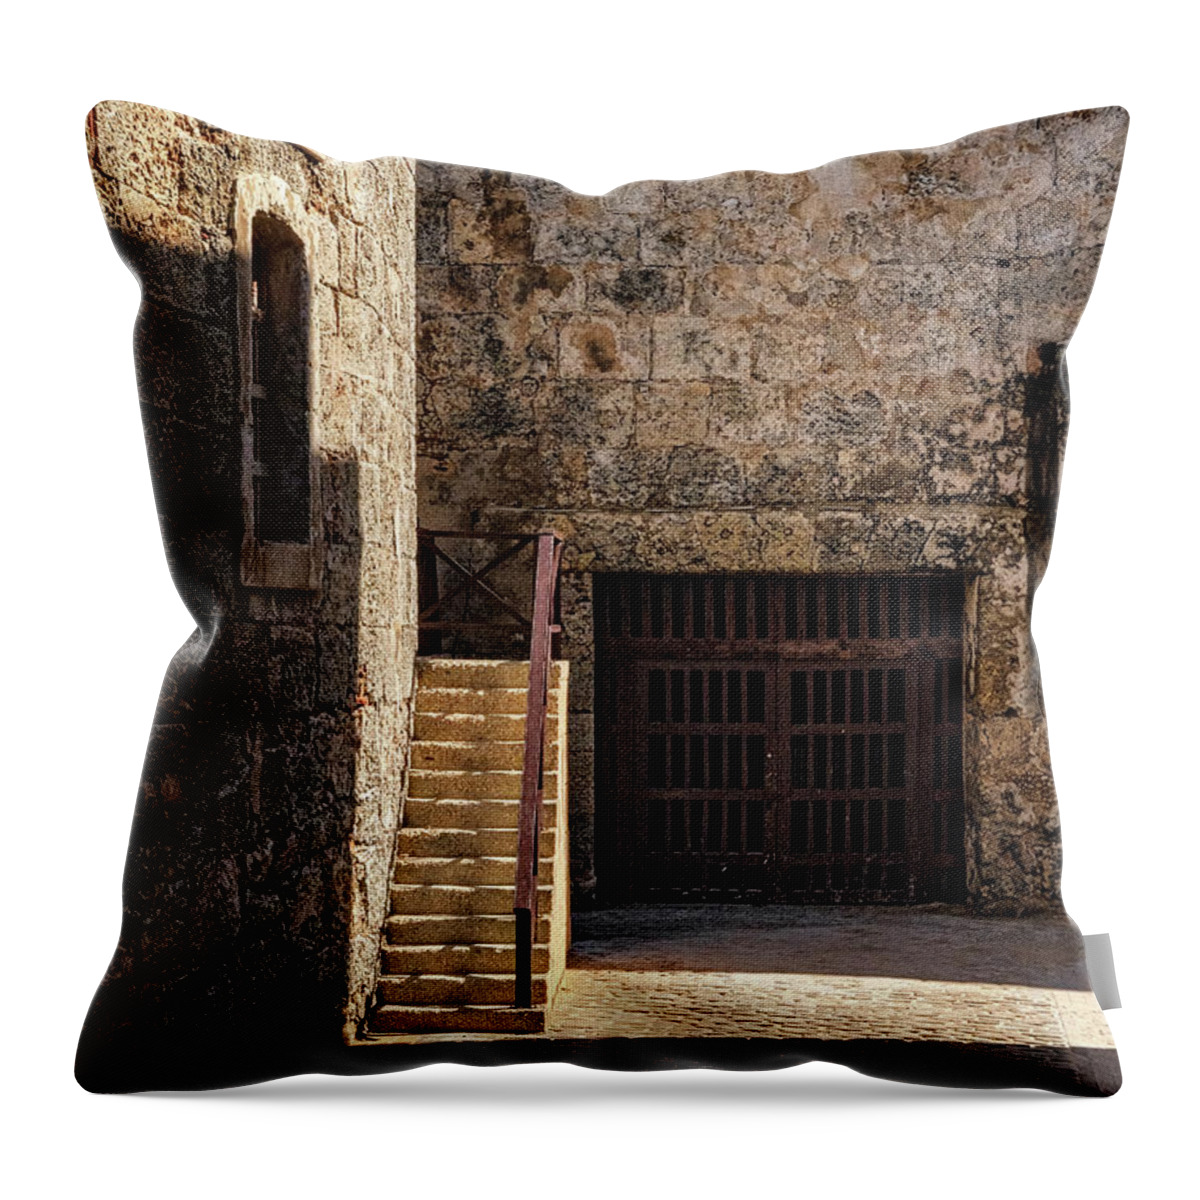 Havana Cuba Throw Pillow featuring the photograph Castle Stairs by Tom Singleton